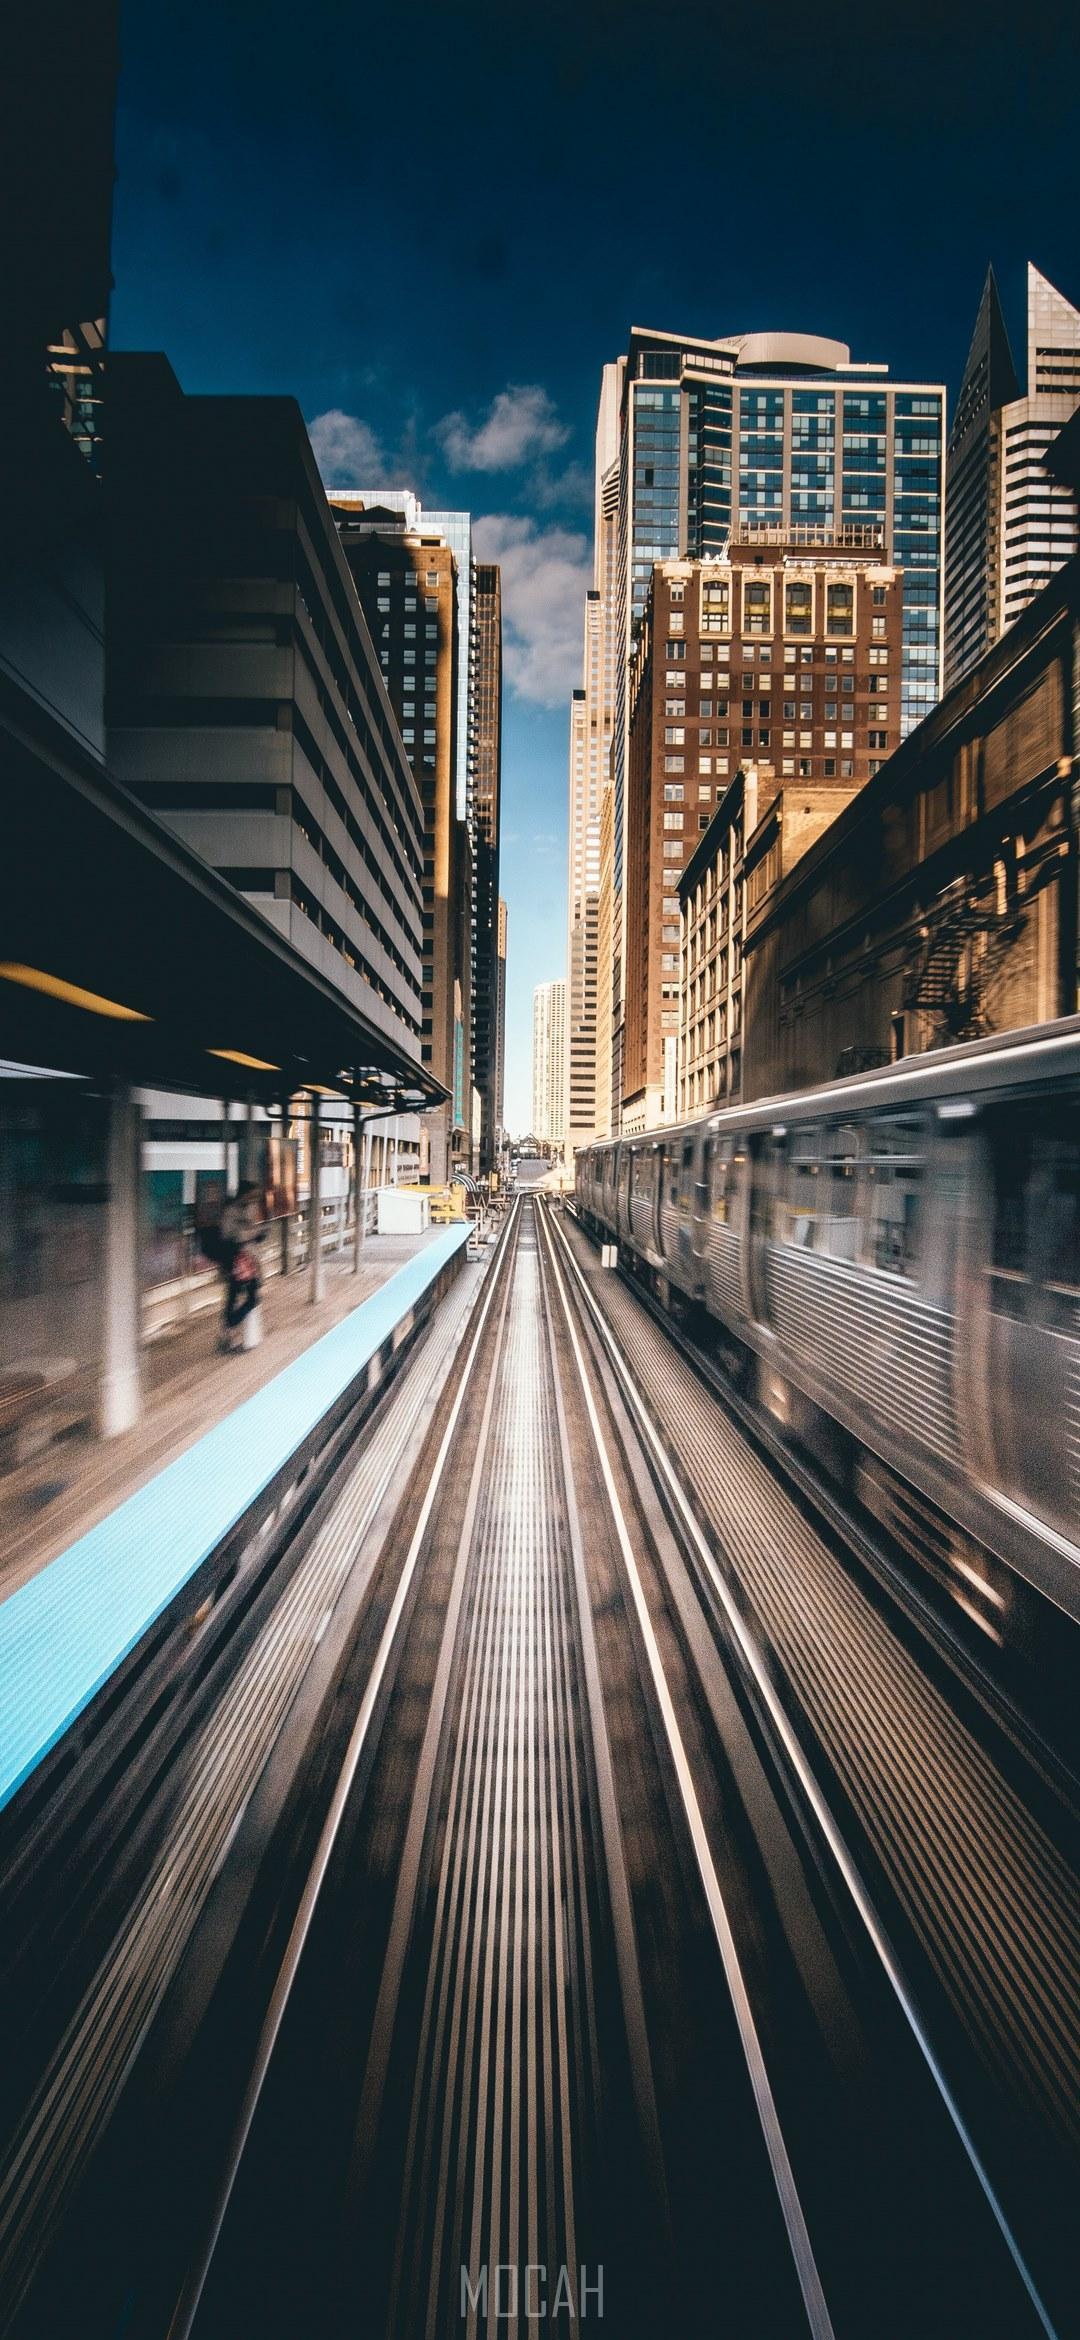 HD wallpaper, 1080X2340, Umidigi F1 Wallpaper 1080P, Train Station Action In Chicago, A Blurred Image Showing Trains Moving On An Outdoor Railway In Chicago